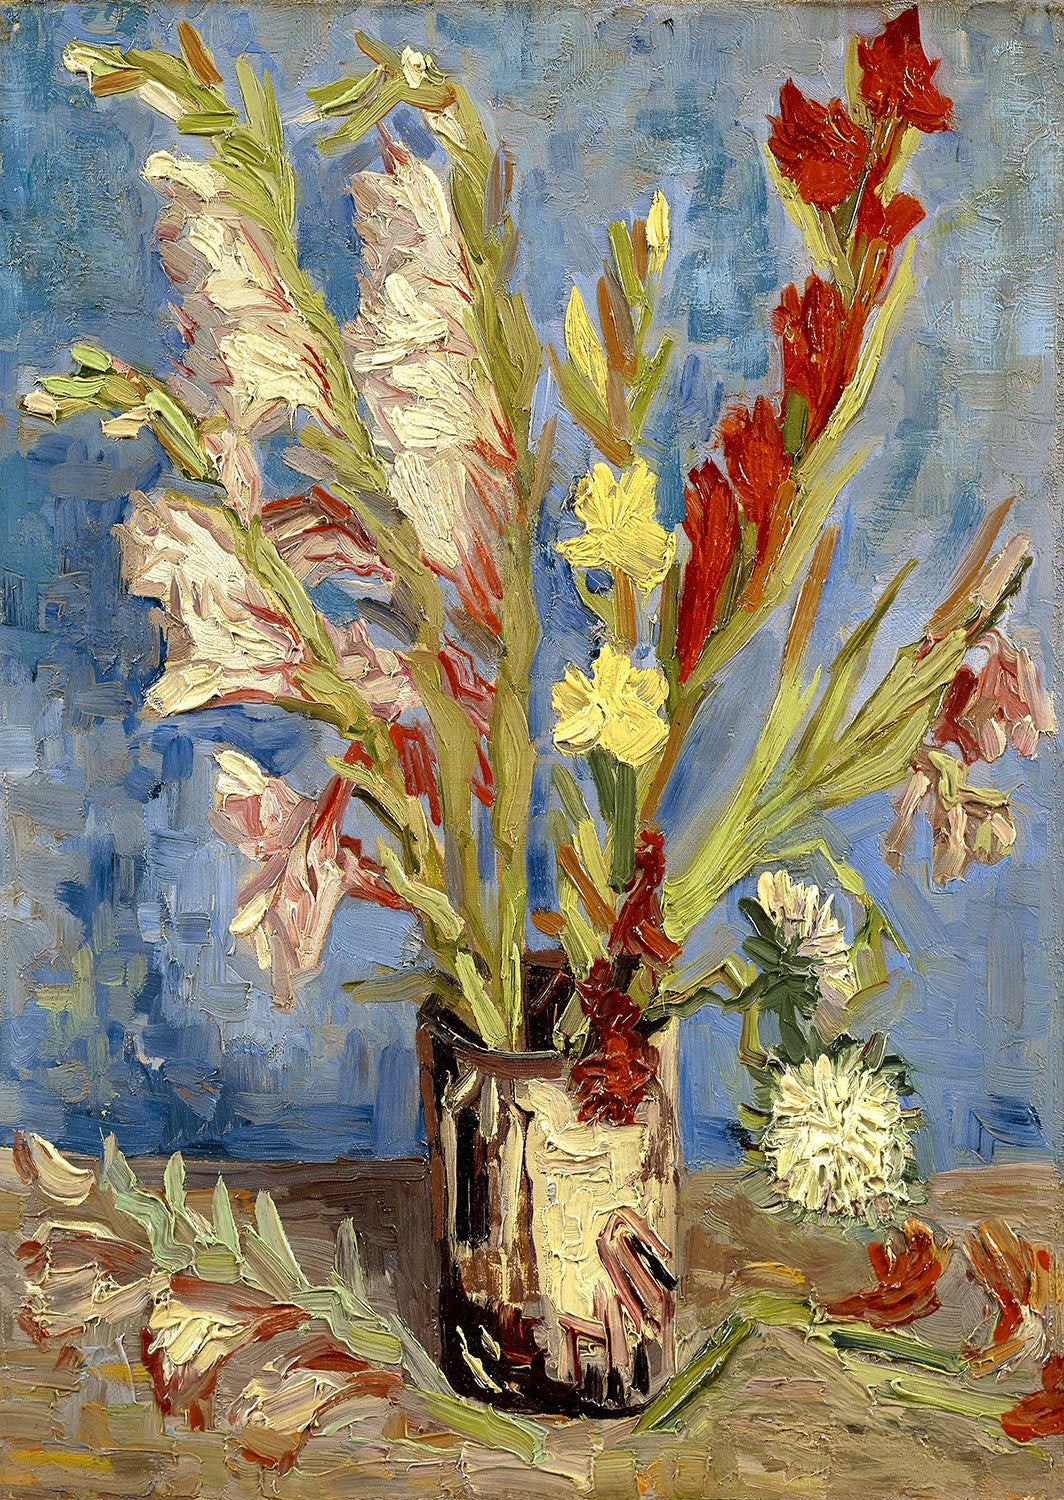 1000 Pieces Jigsaw Puzzle - Vincent Van Gogh: Vase with Gladioli and Chinese Asters (1161)